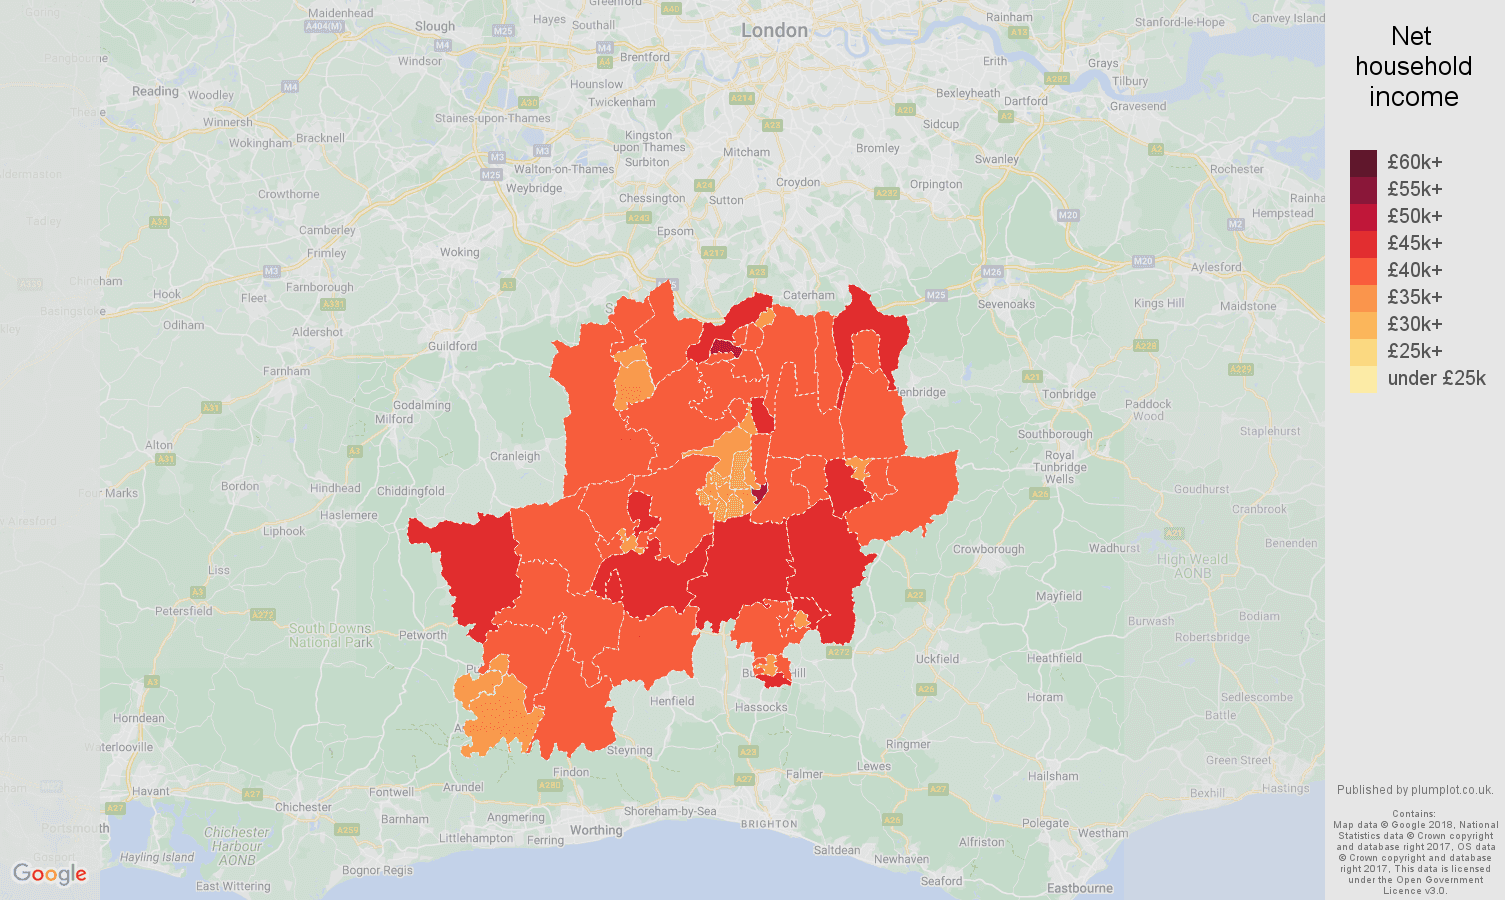 Redhill net household income map